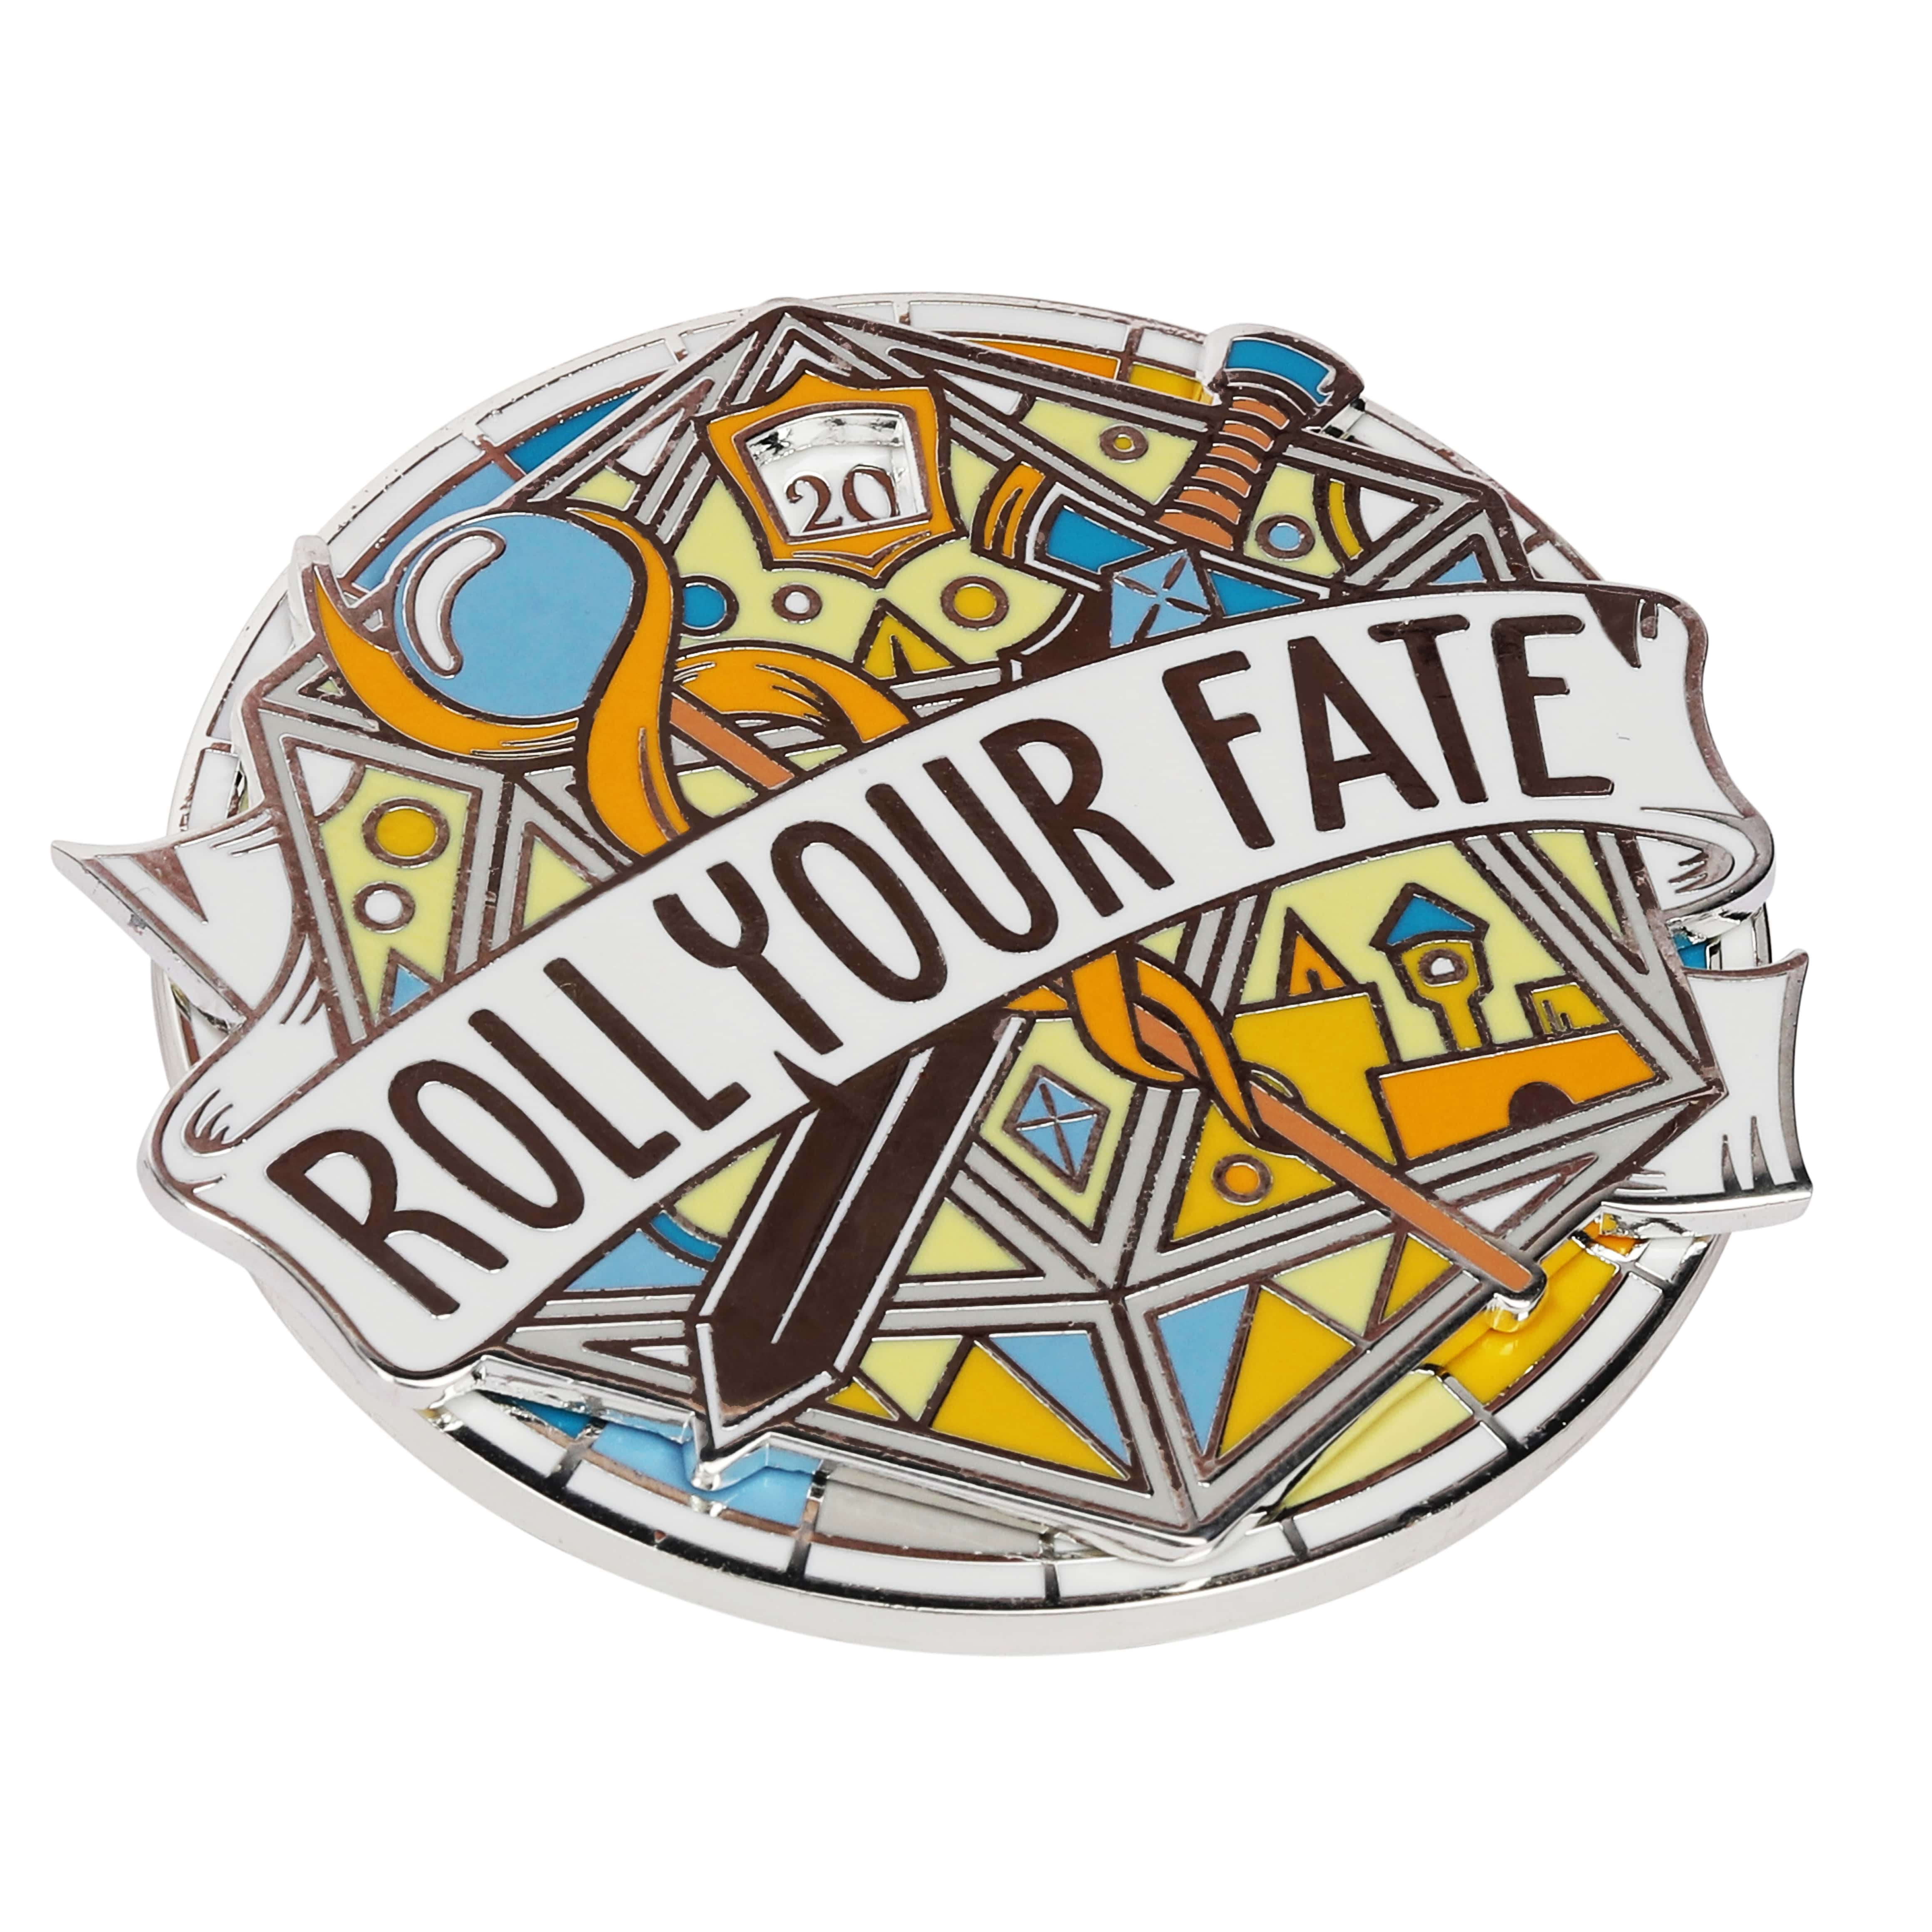 Roll Your Fate Spinner Pin